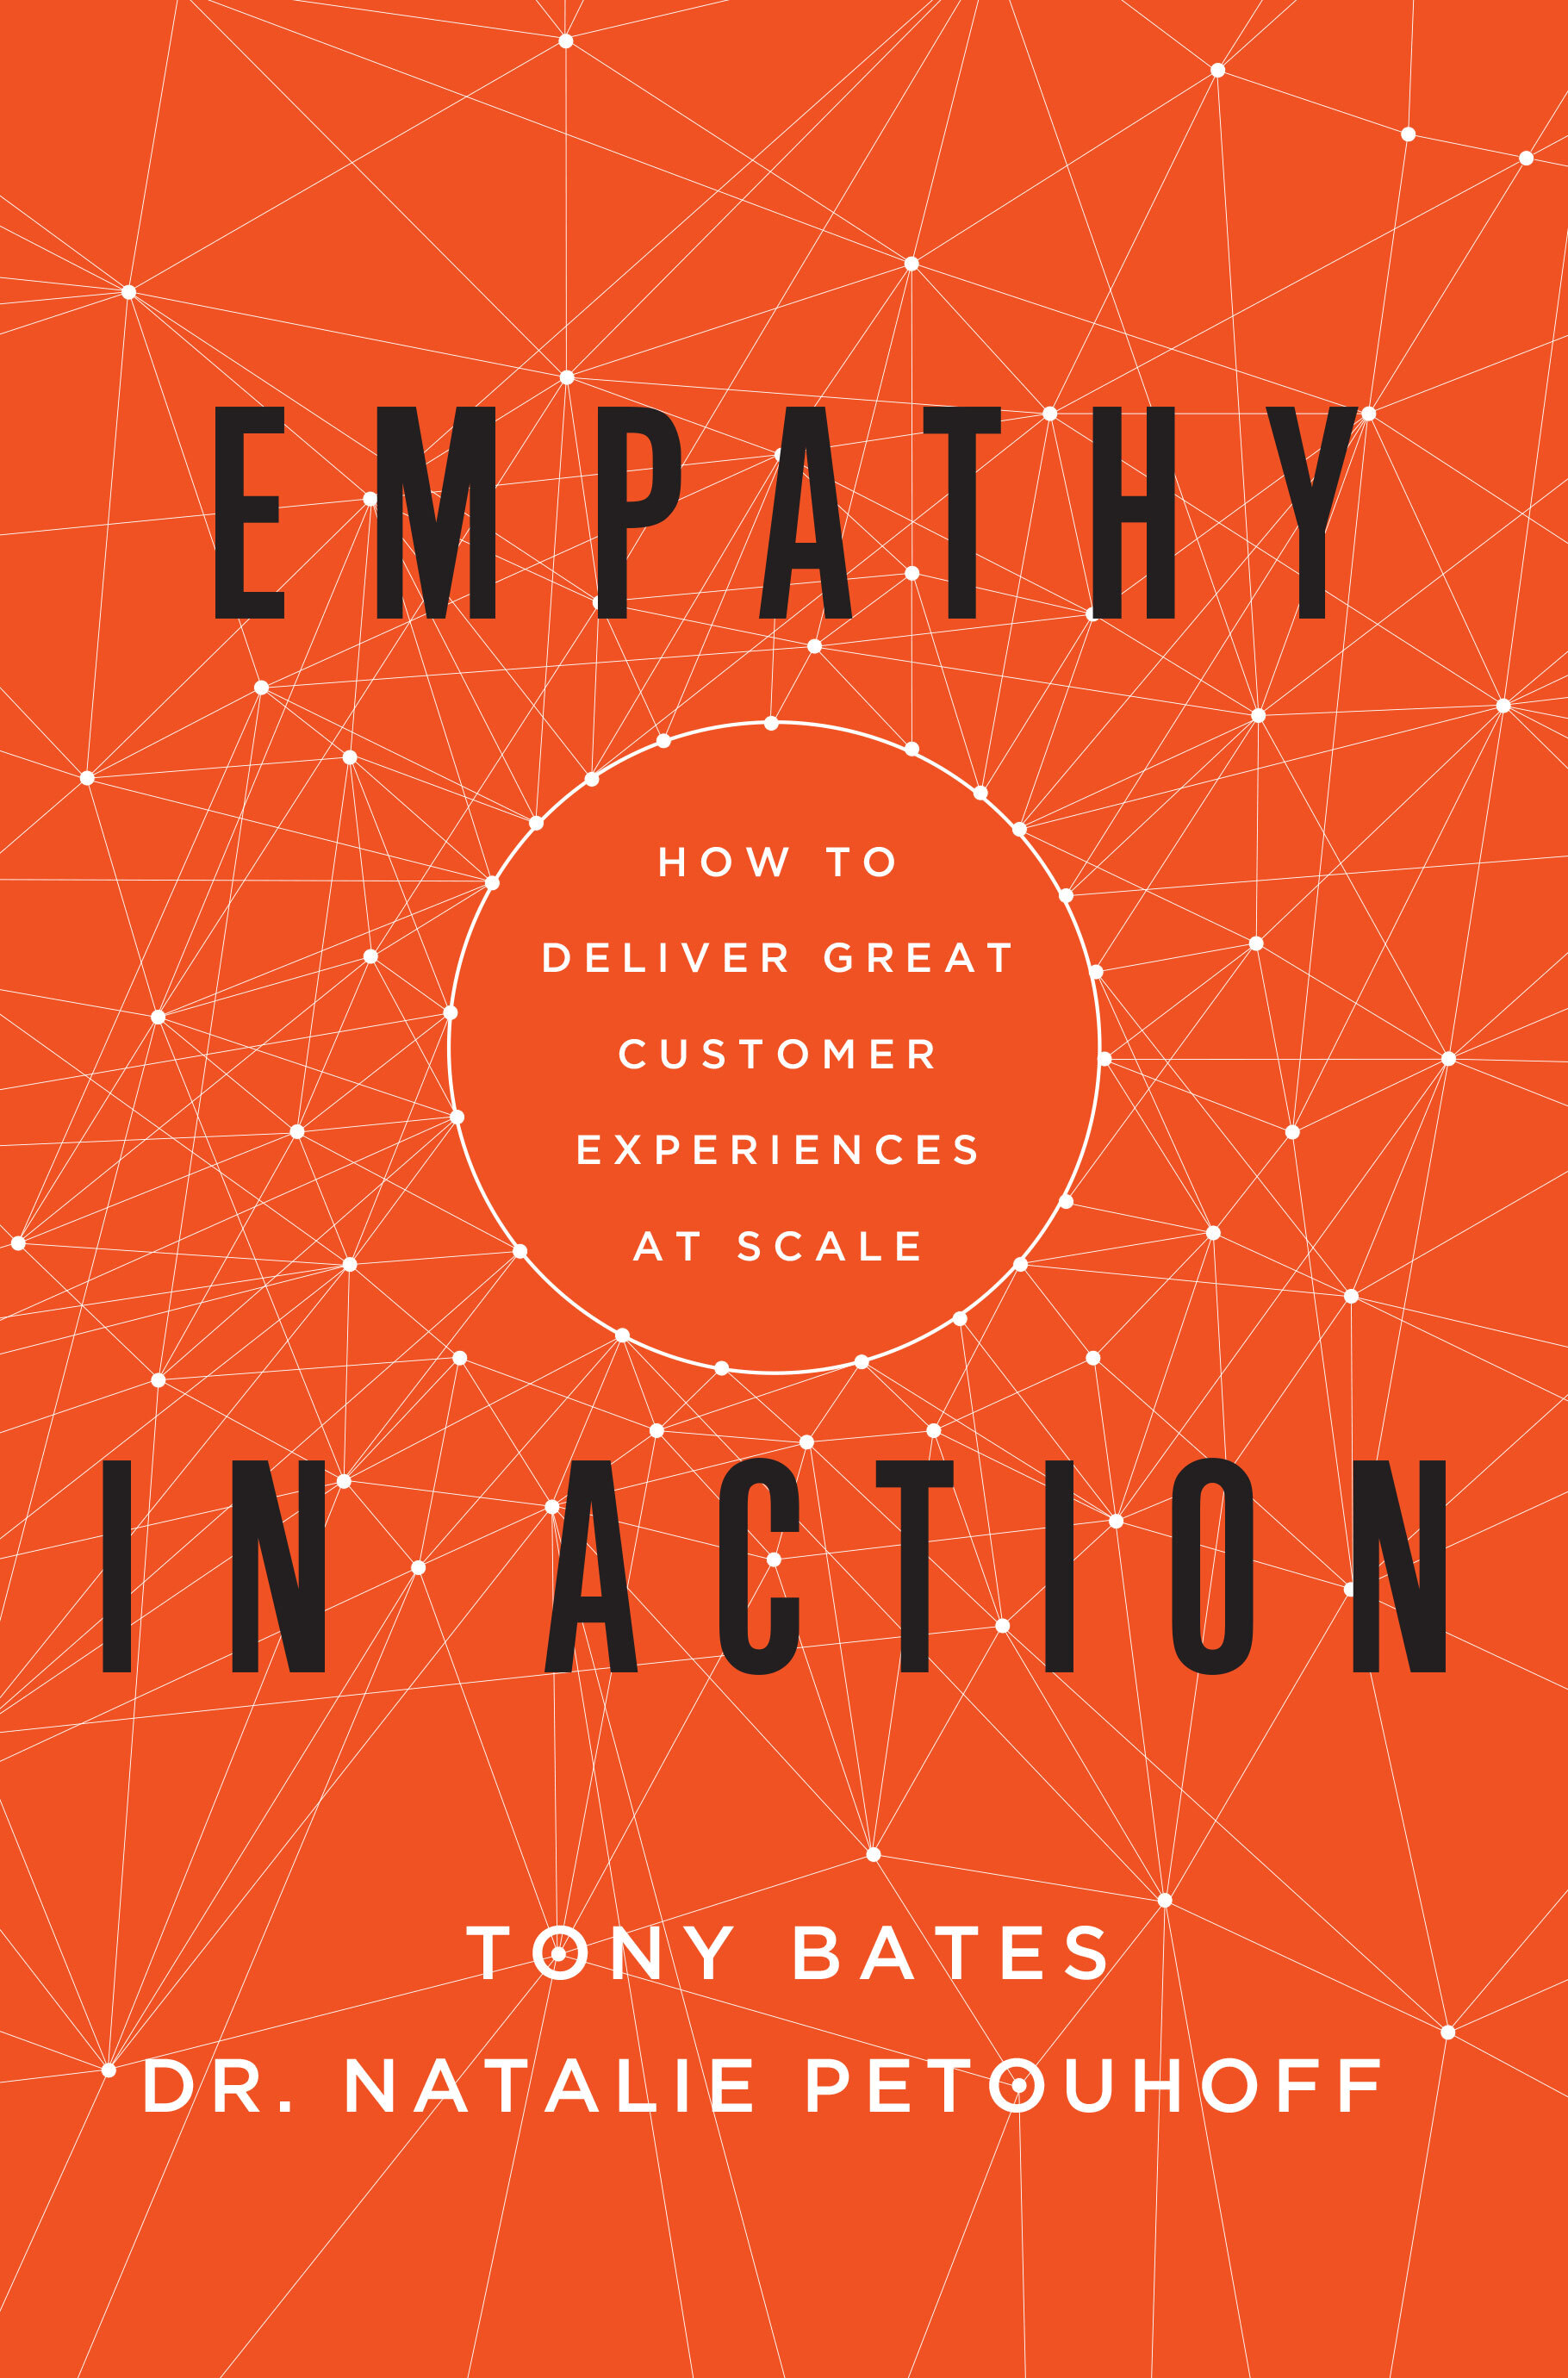 Empathy in Action How to Deliver Great Customer Experiences at Scale